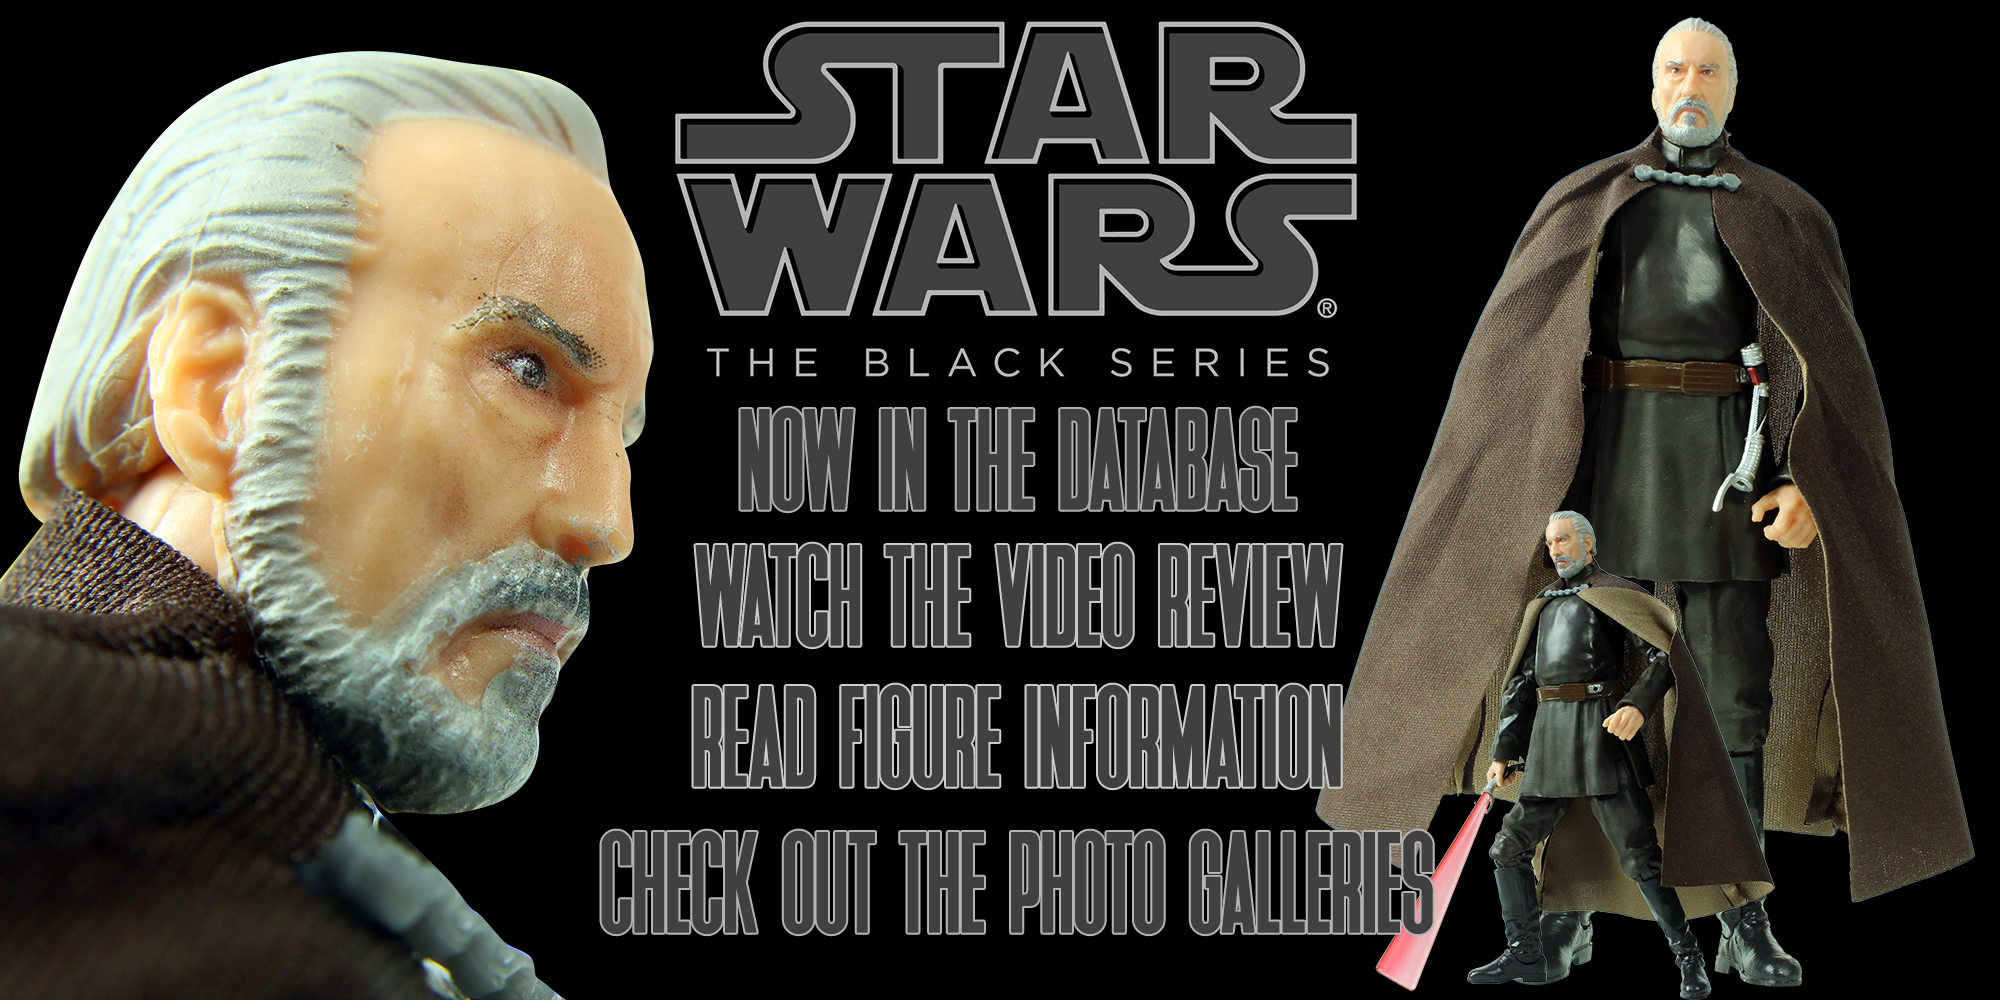 Learn More About The Black Series Count Dooku Figure!